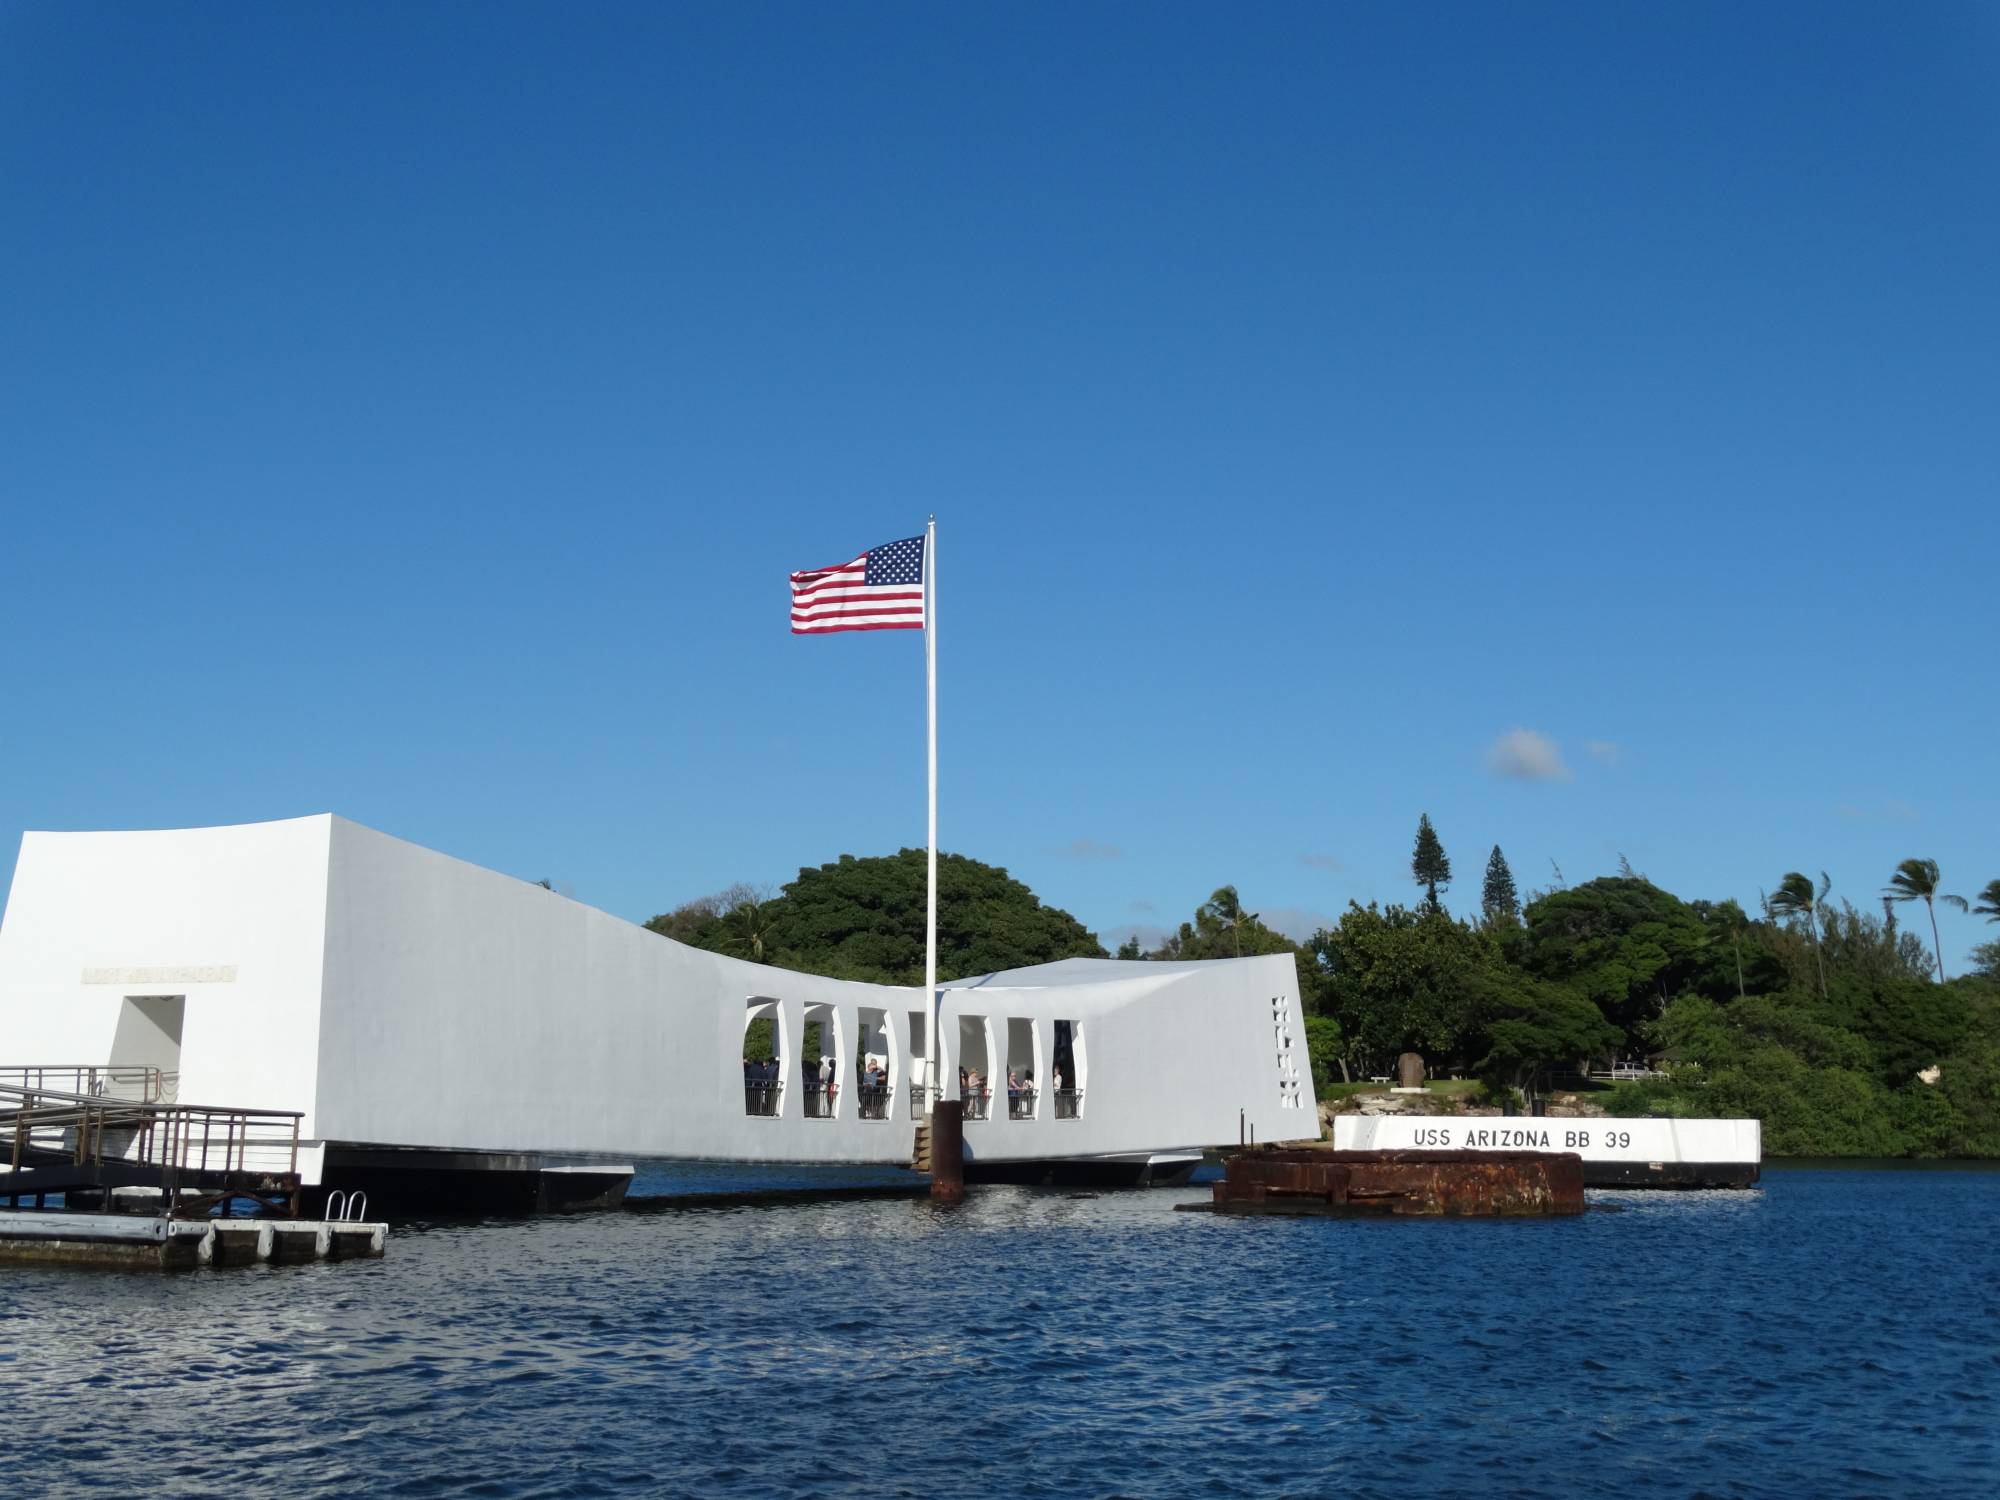 Visit the Pearl Harbor Memorial while staying at Aulani |PassPorter.com